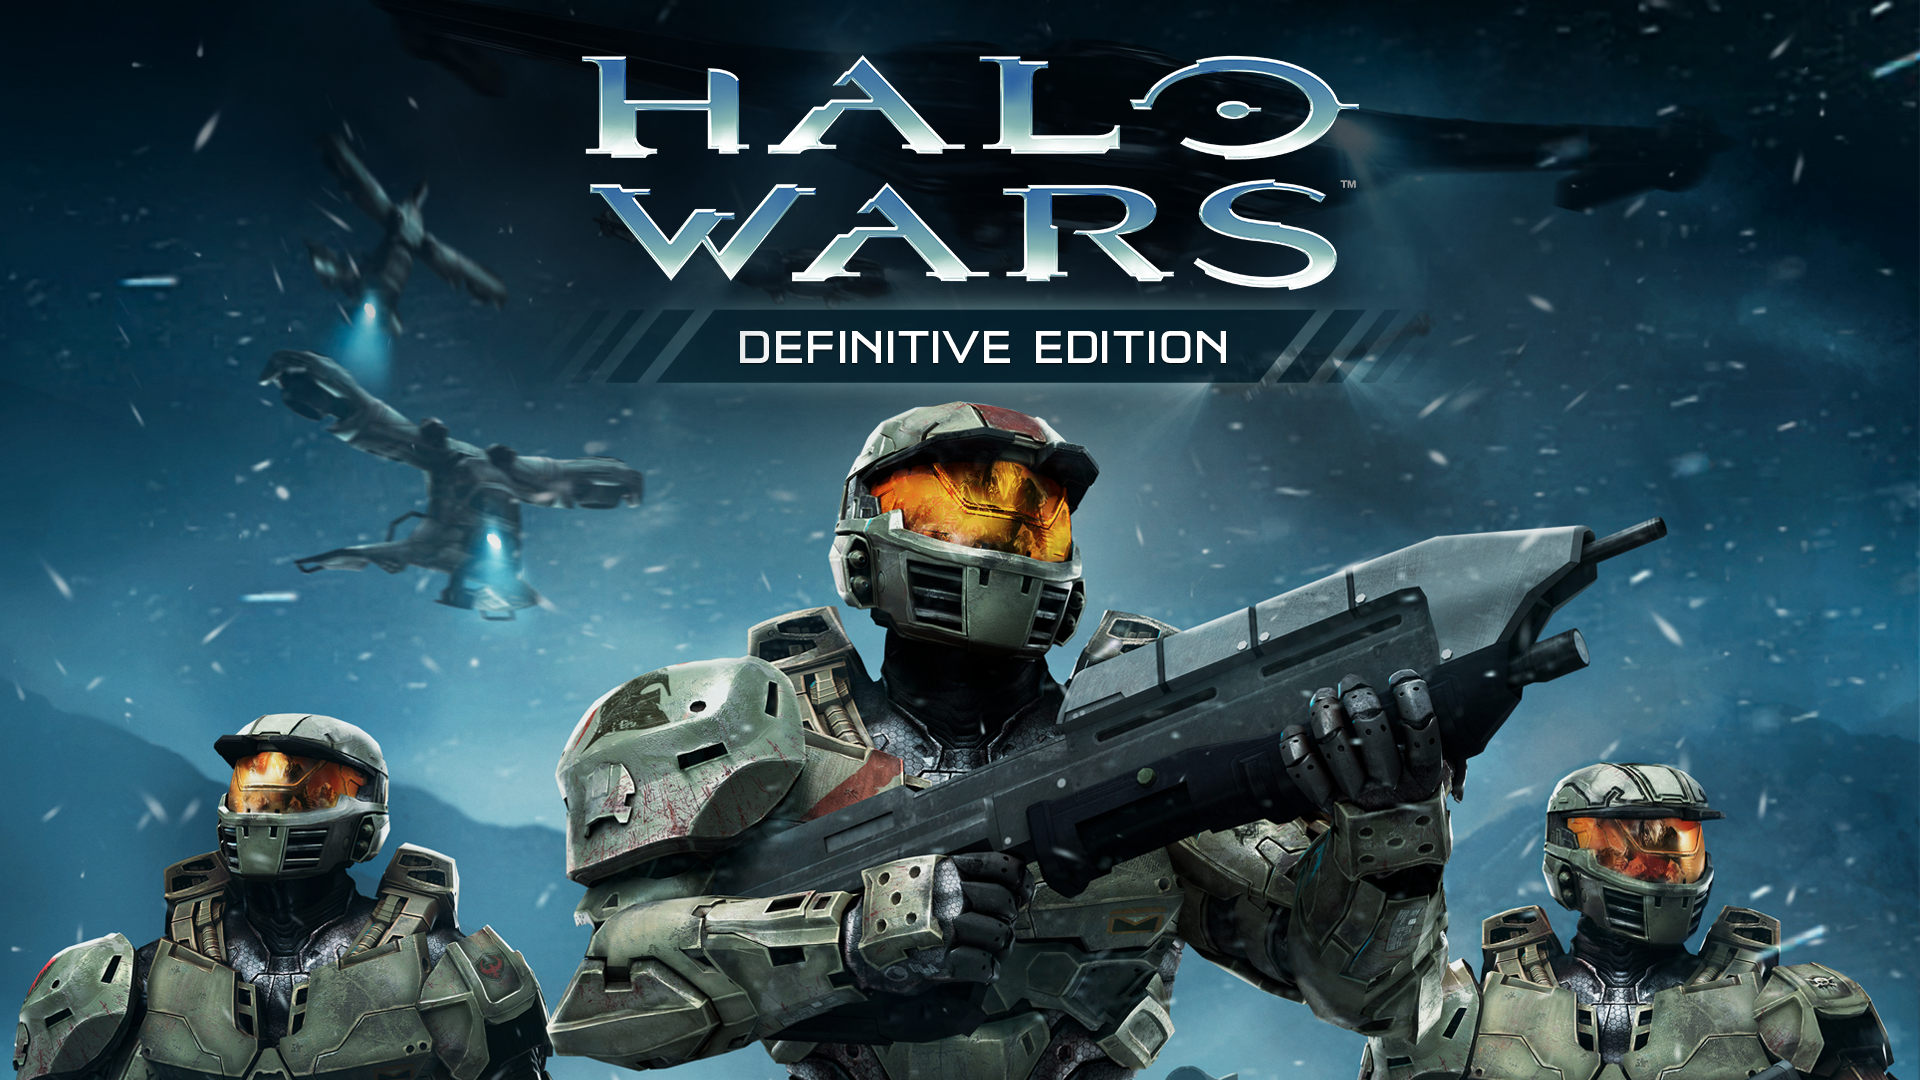 Video For Grab Halo Wars: Definitive Edition on April 20 for Xbox, Windows 10 PC and Steam